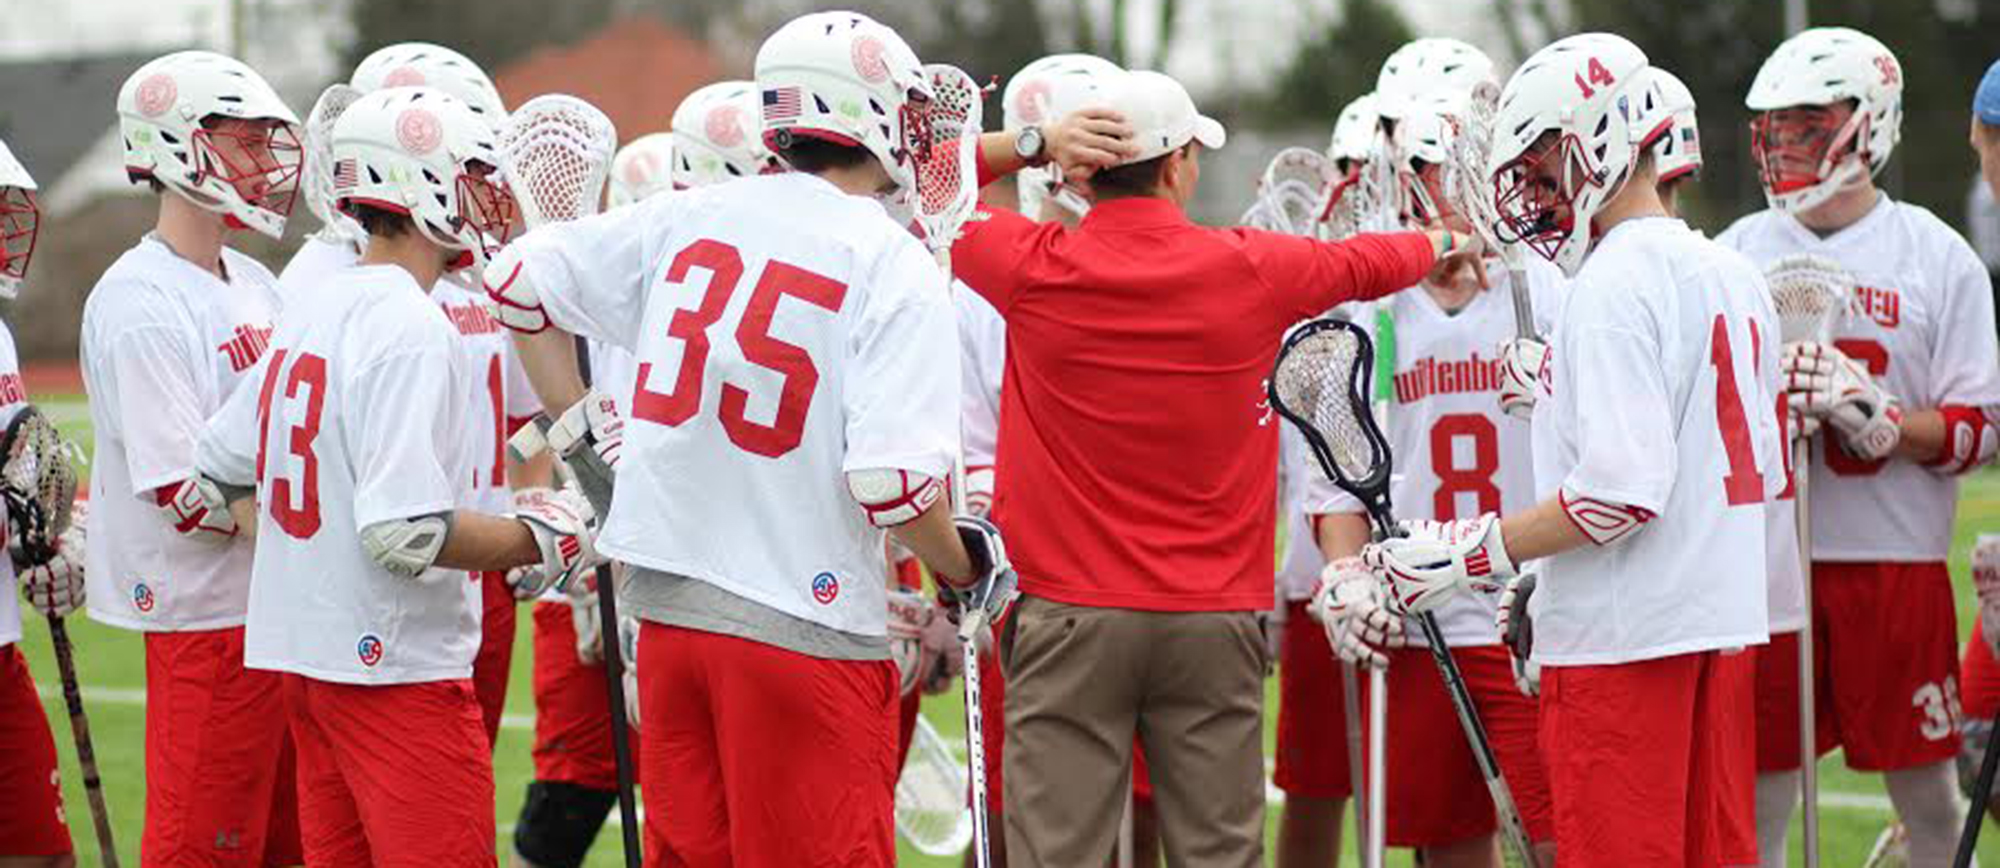 Tigers Improve to 2-0 in NCAC Play with 20-8 Win Over Oberlin